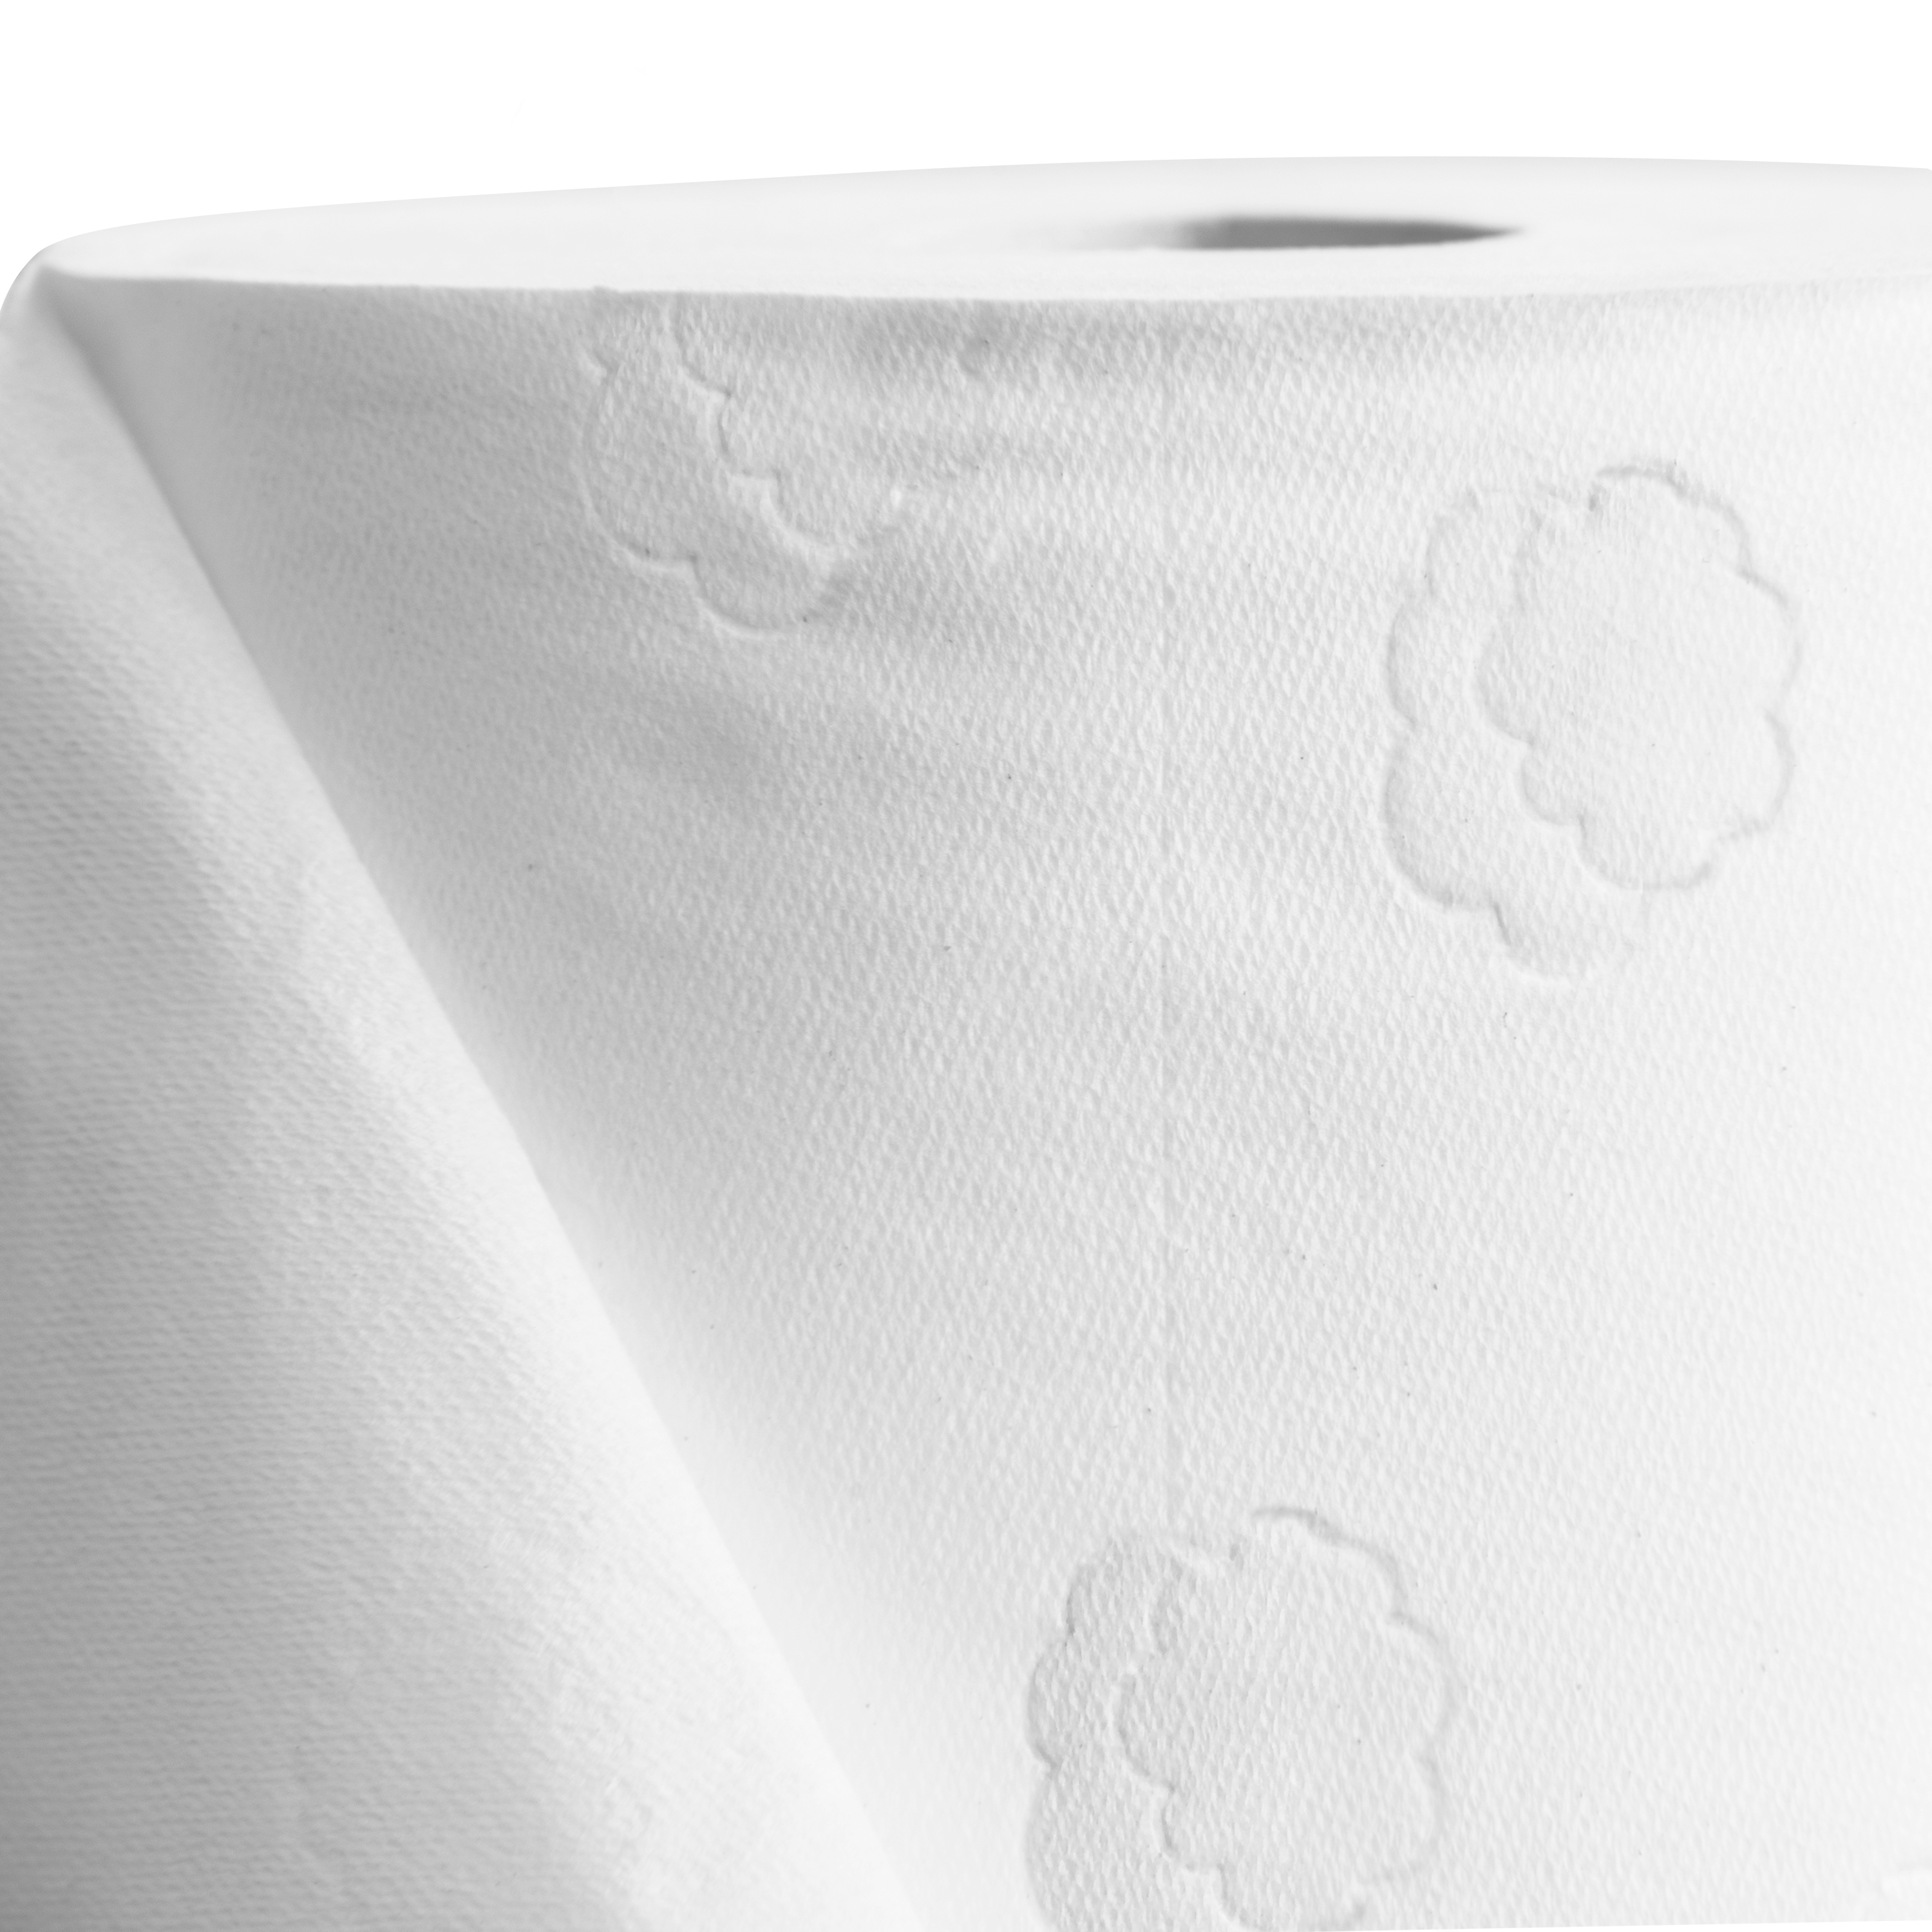 White Cloud Ultra Strong & Soft Toilet Paper, 12 Mega Rolls - image 5 of 6